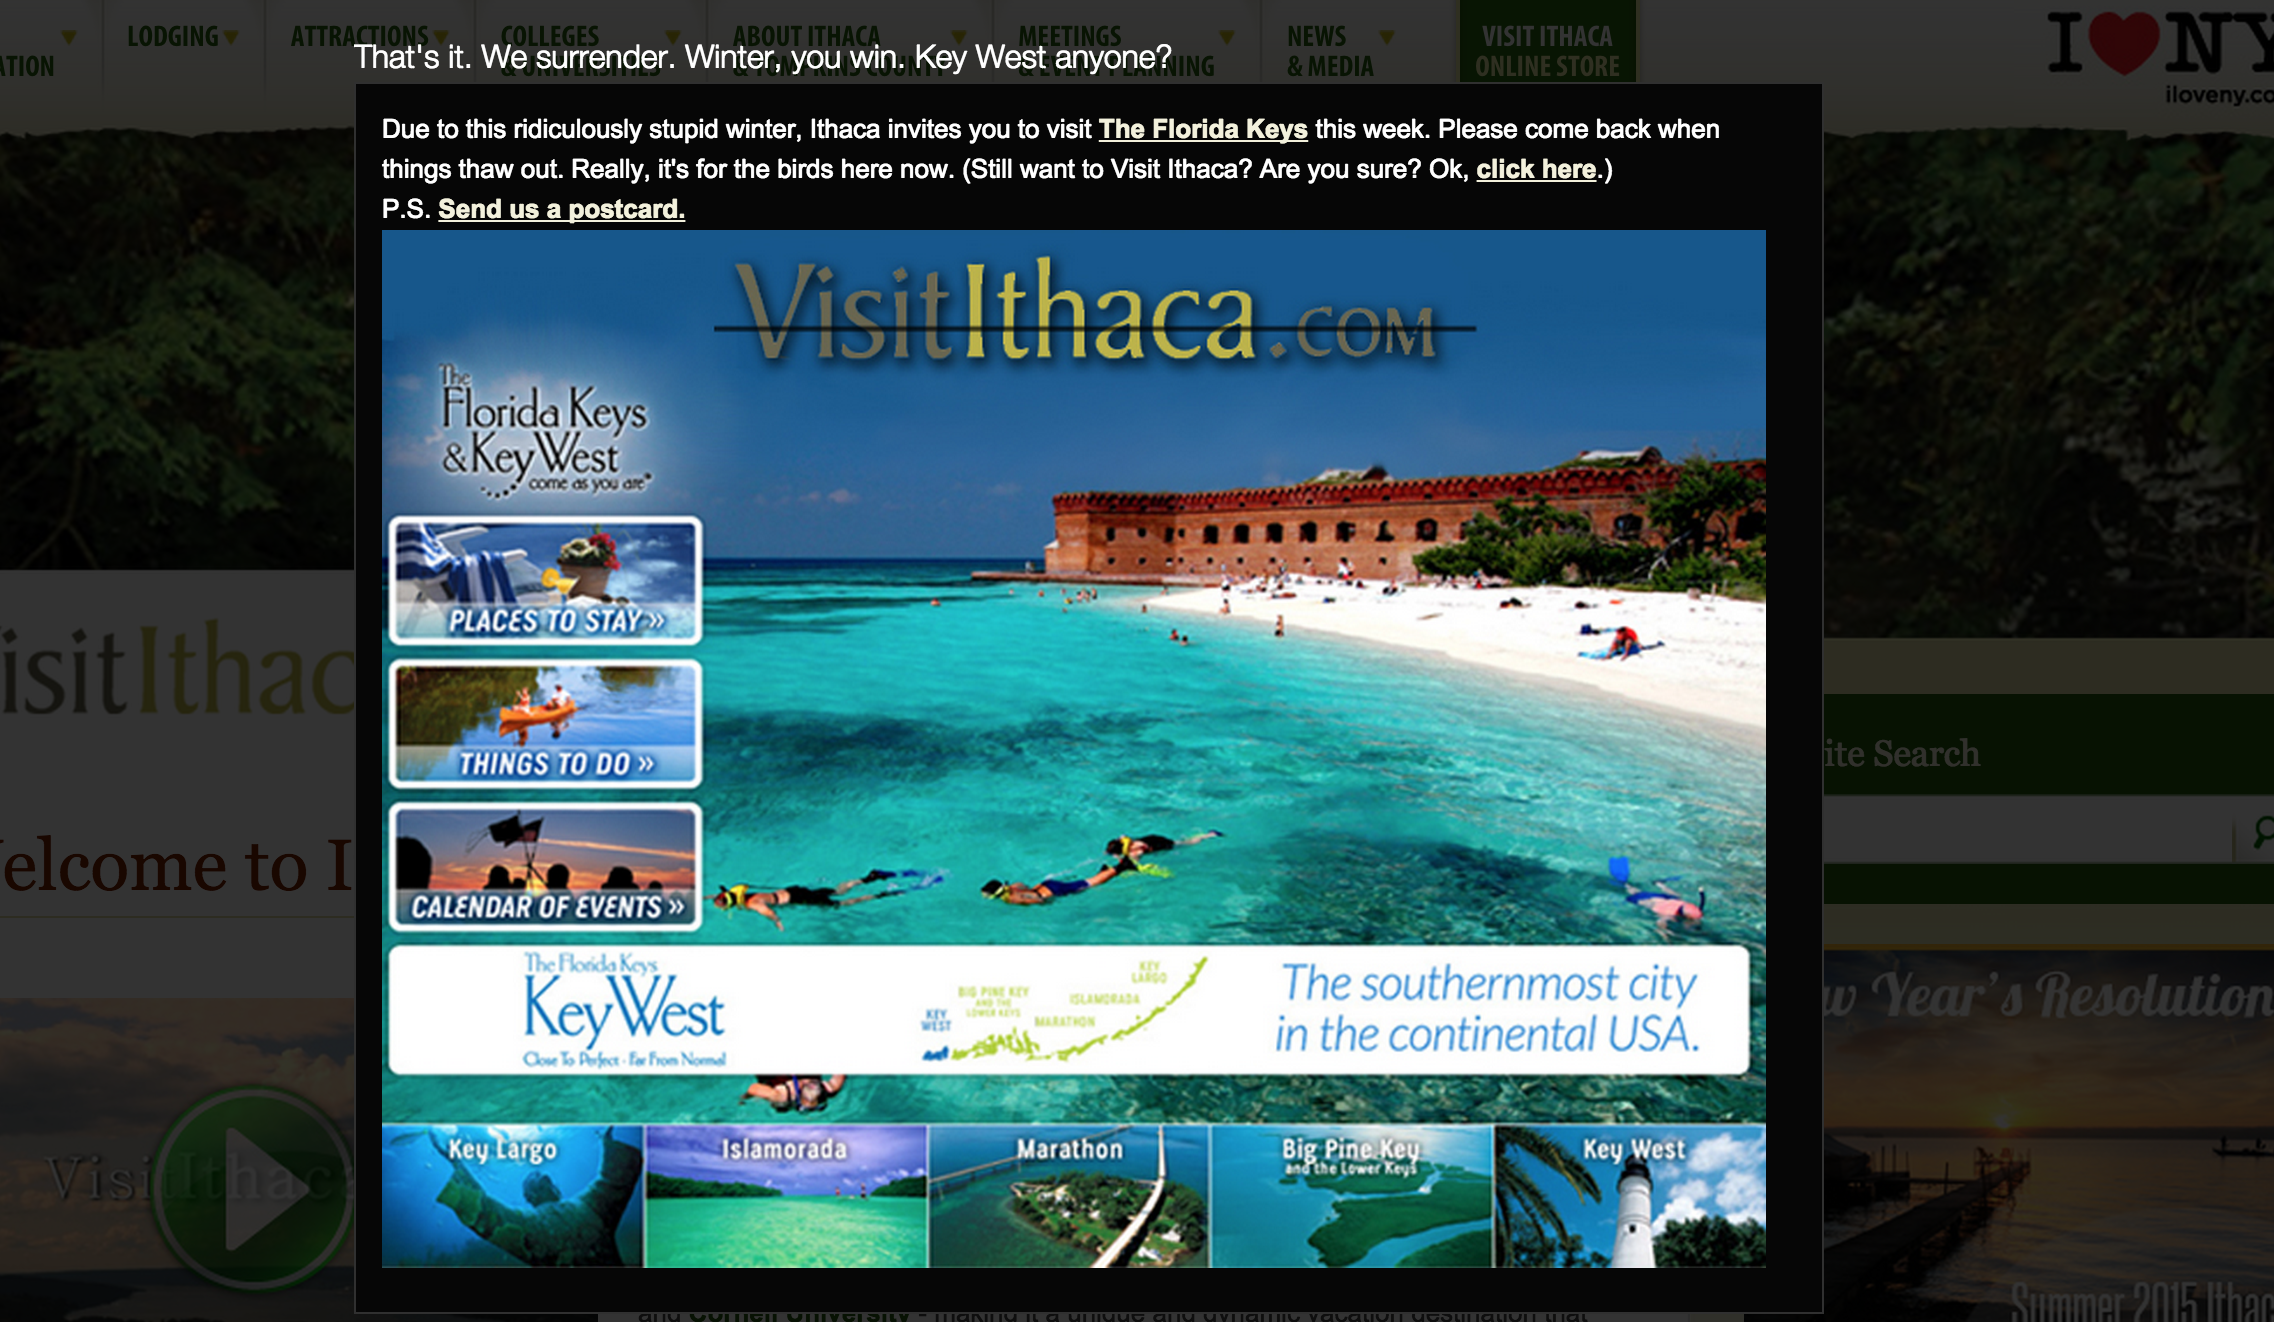 Visitors Bureau For Ice-Cold Ithaca Tells People To Just Go Get Warm In Key West